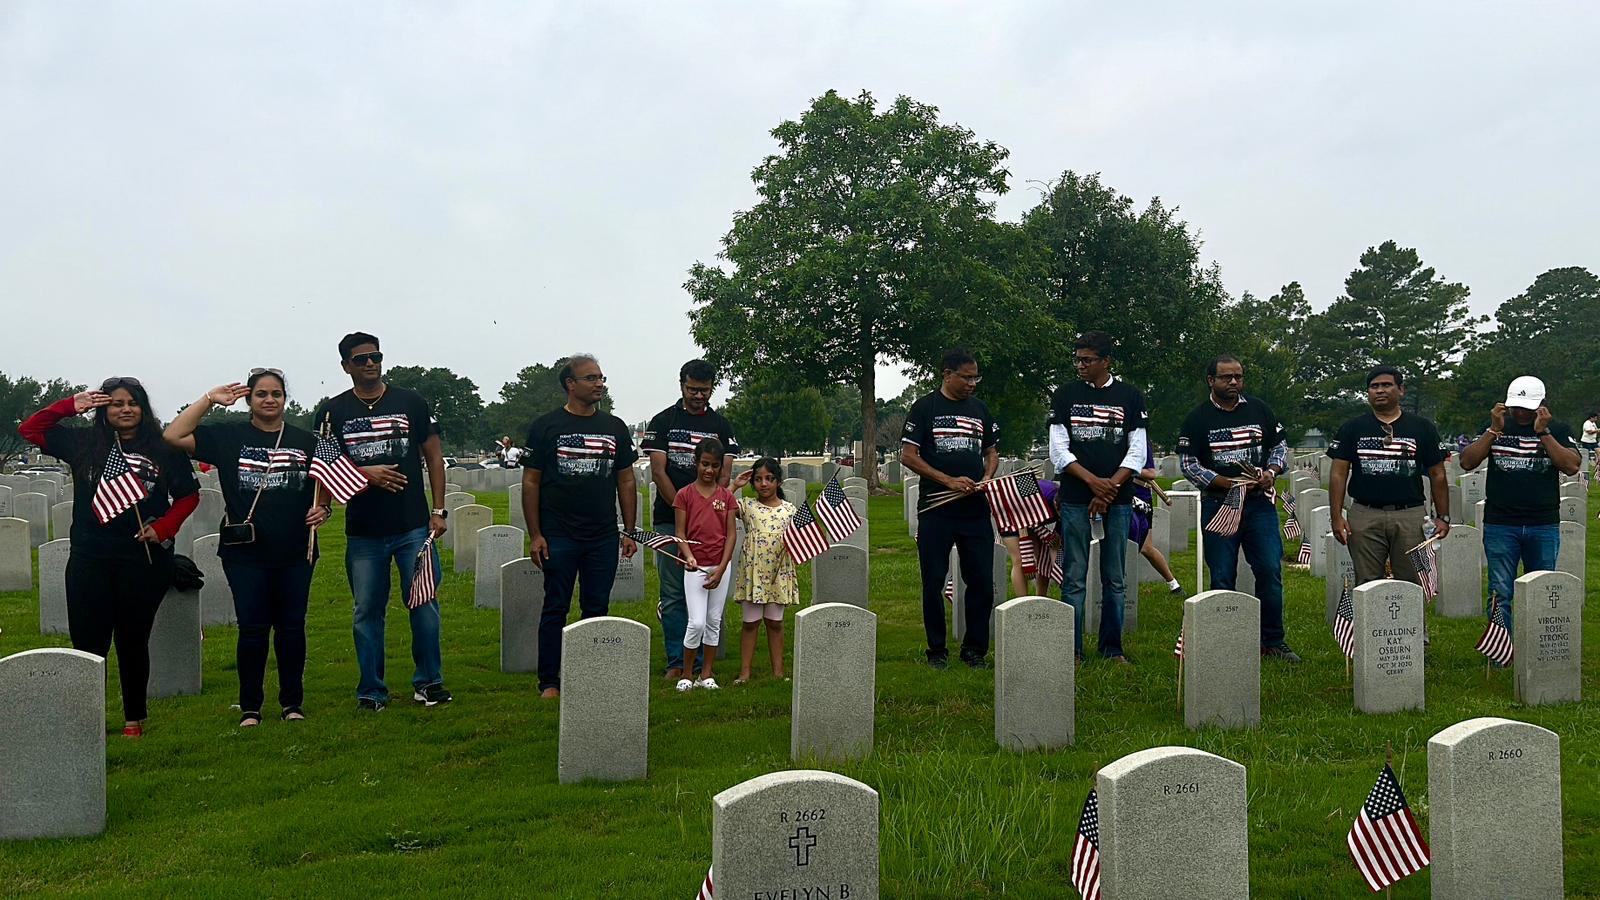 ITServe Houston Gathering on Memorial Day as tribute to fallen heroes